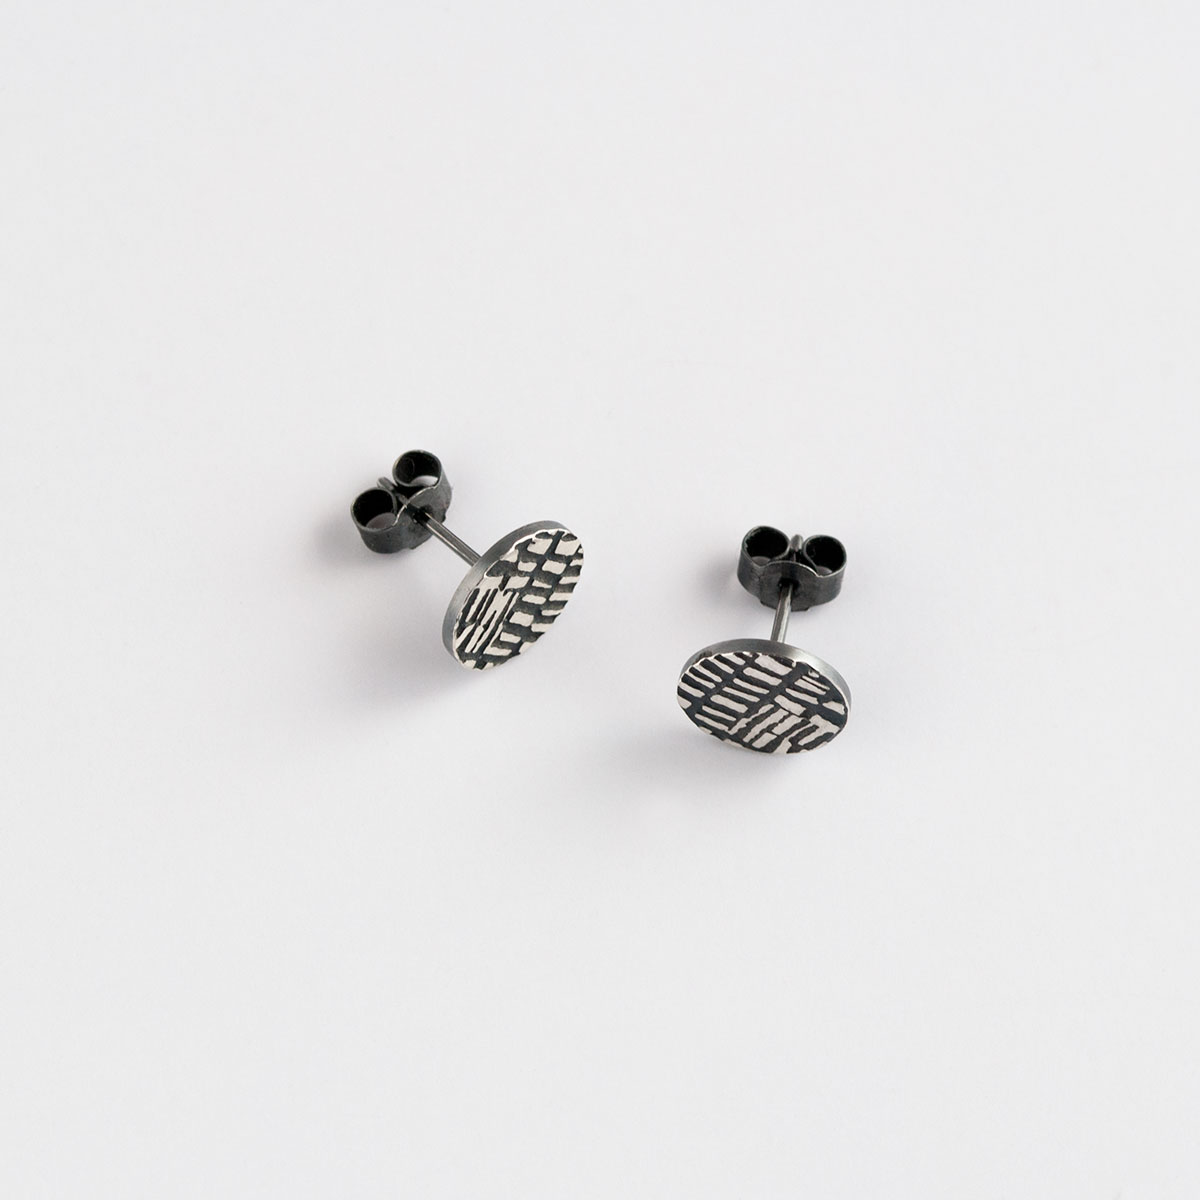 ‘Weave’ Silver and Black Dot Stud Earrings, Small